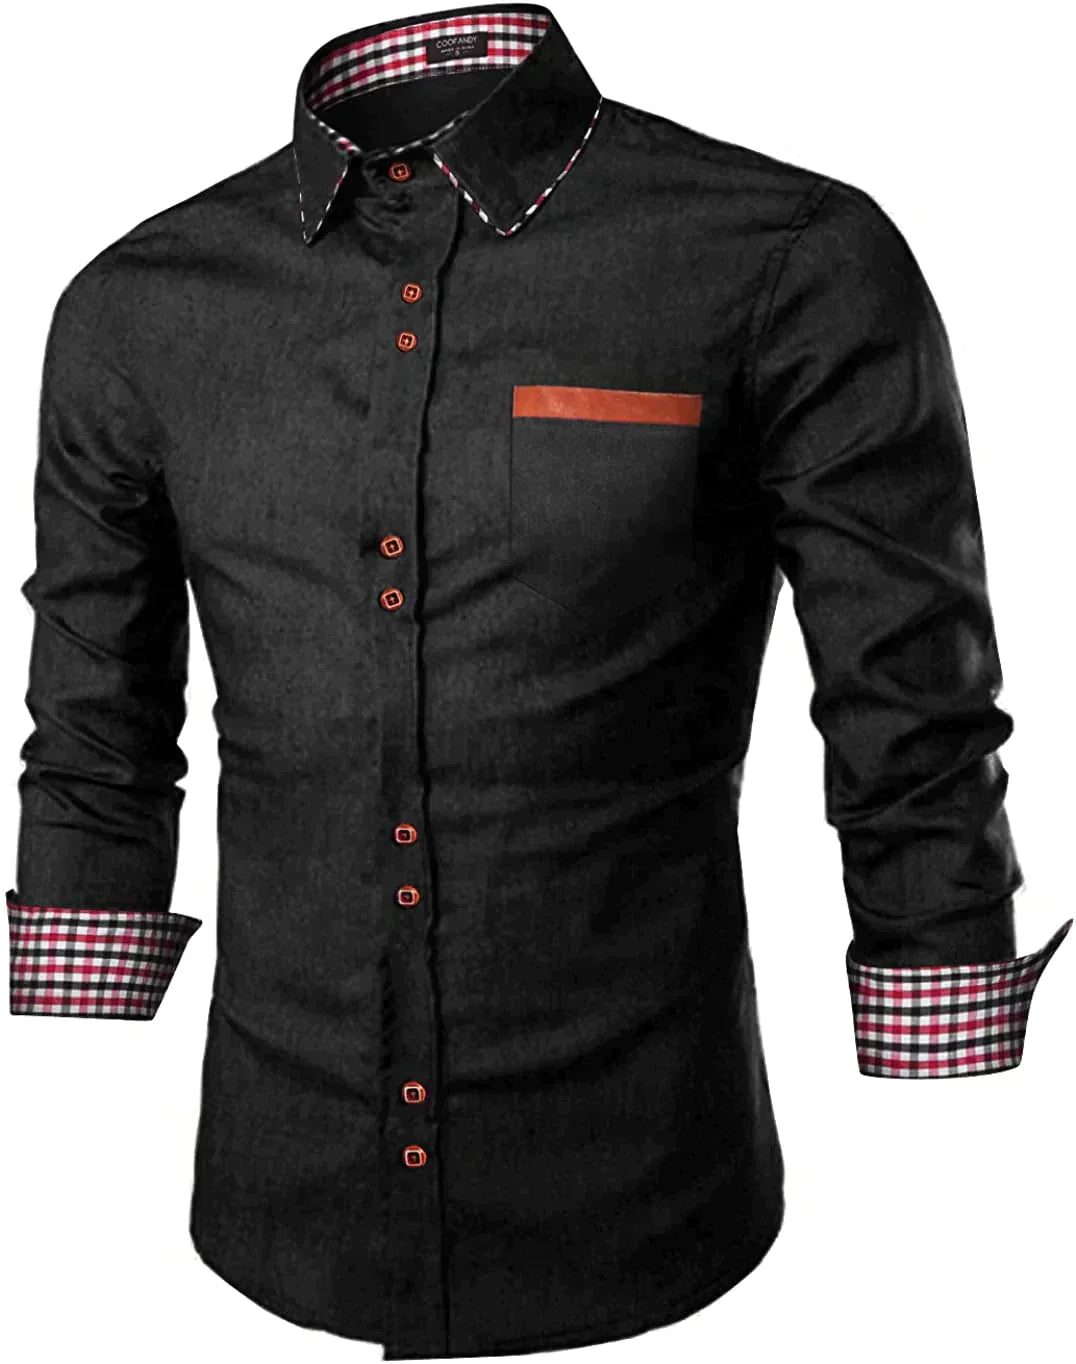 Casual Button Down Denim Shirt with Pocket (US Only) Shirts COOFANDY Store Black S 